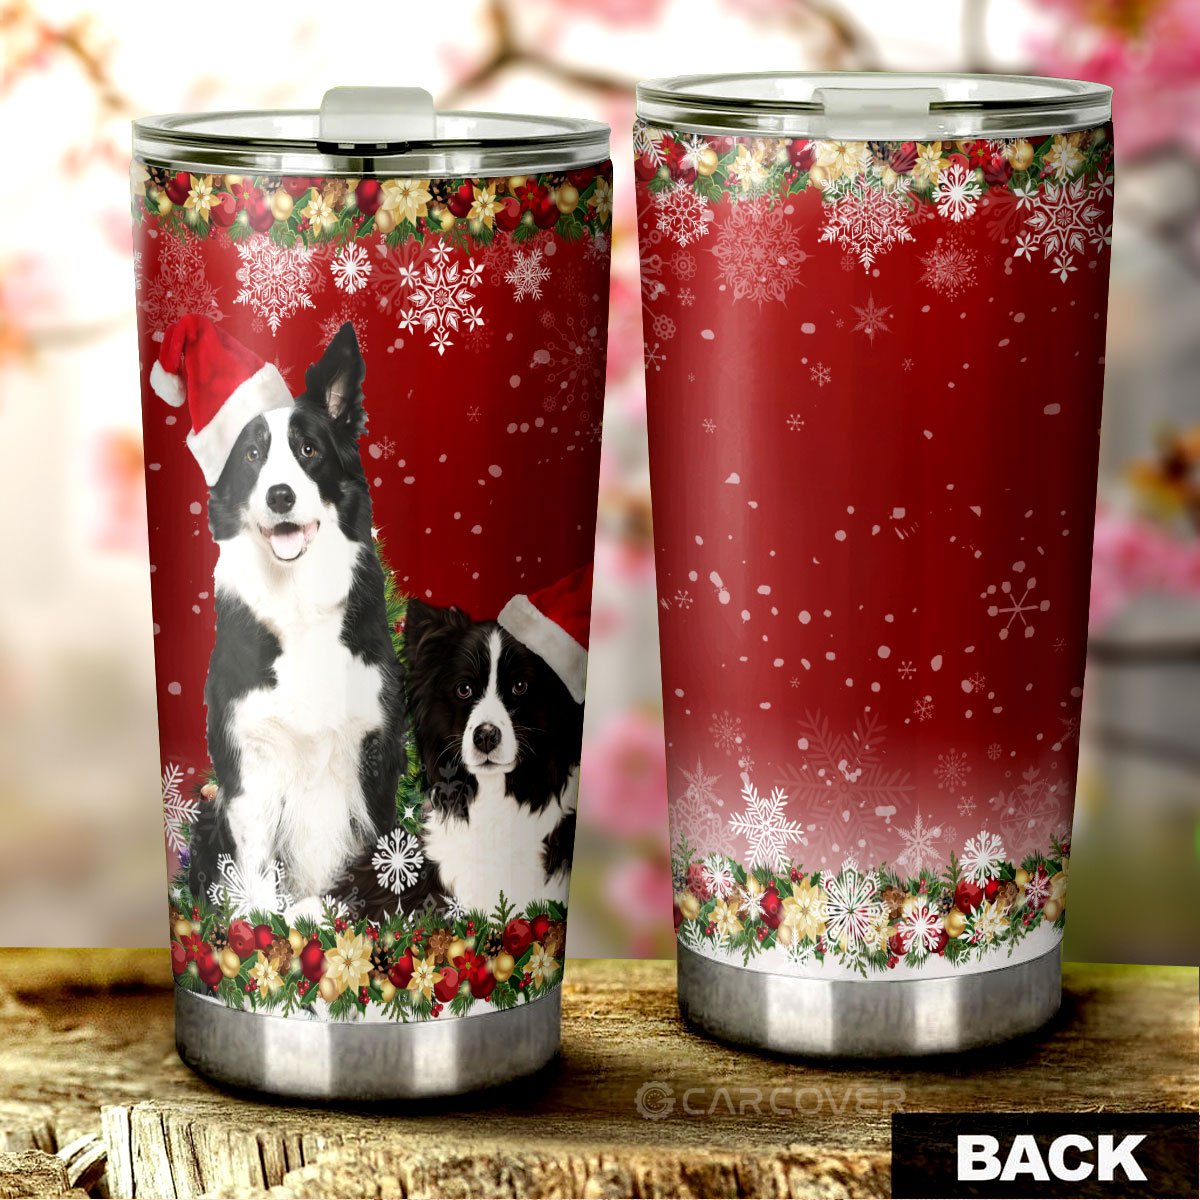 Merry Christmas Border Collies Tumbler Cup Custom Animal Car Accessories For Dog Lovers - Gearcarcover - 4